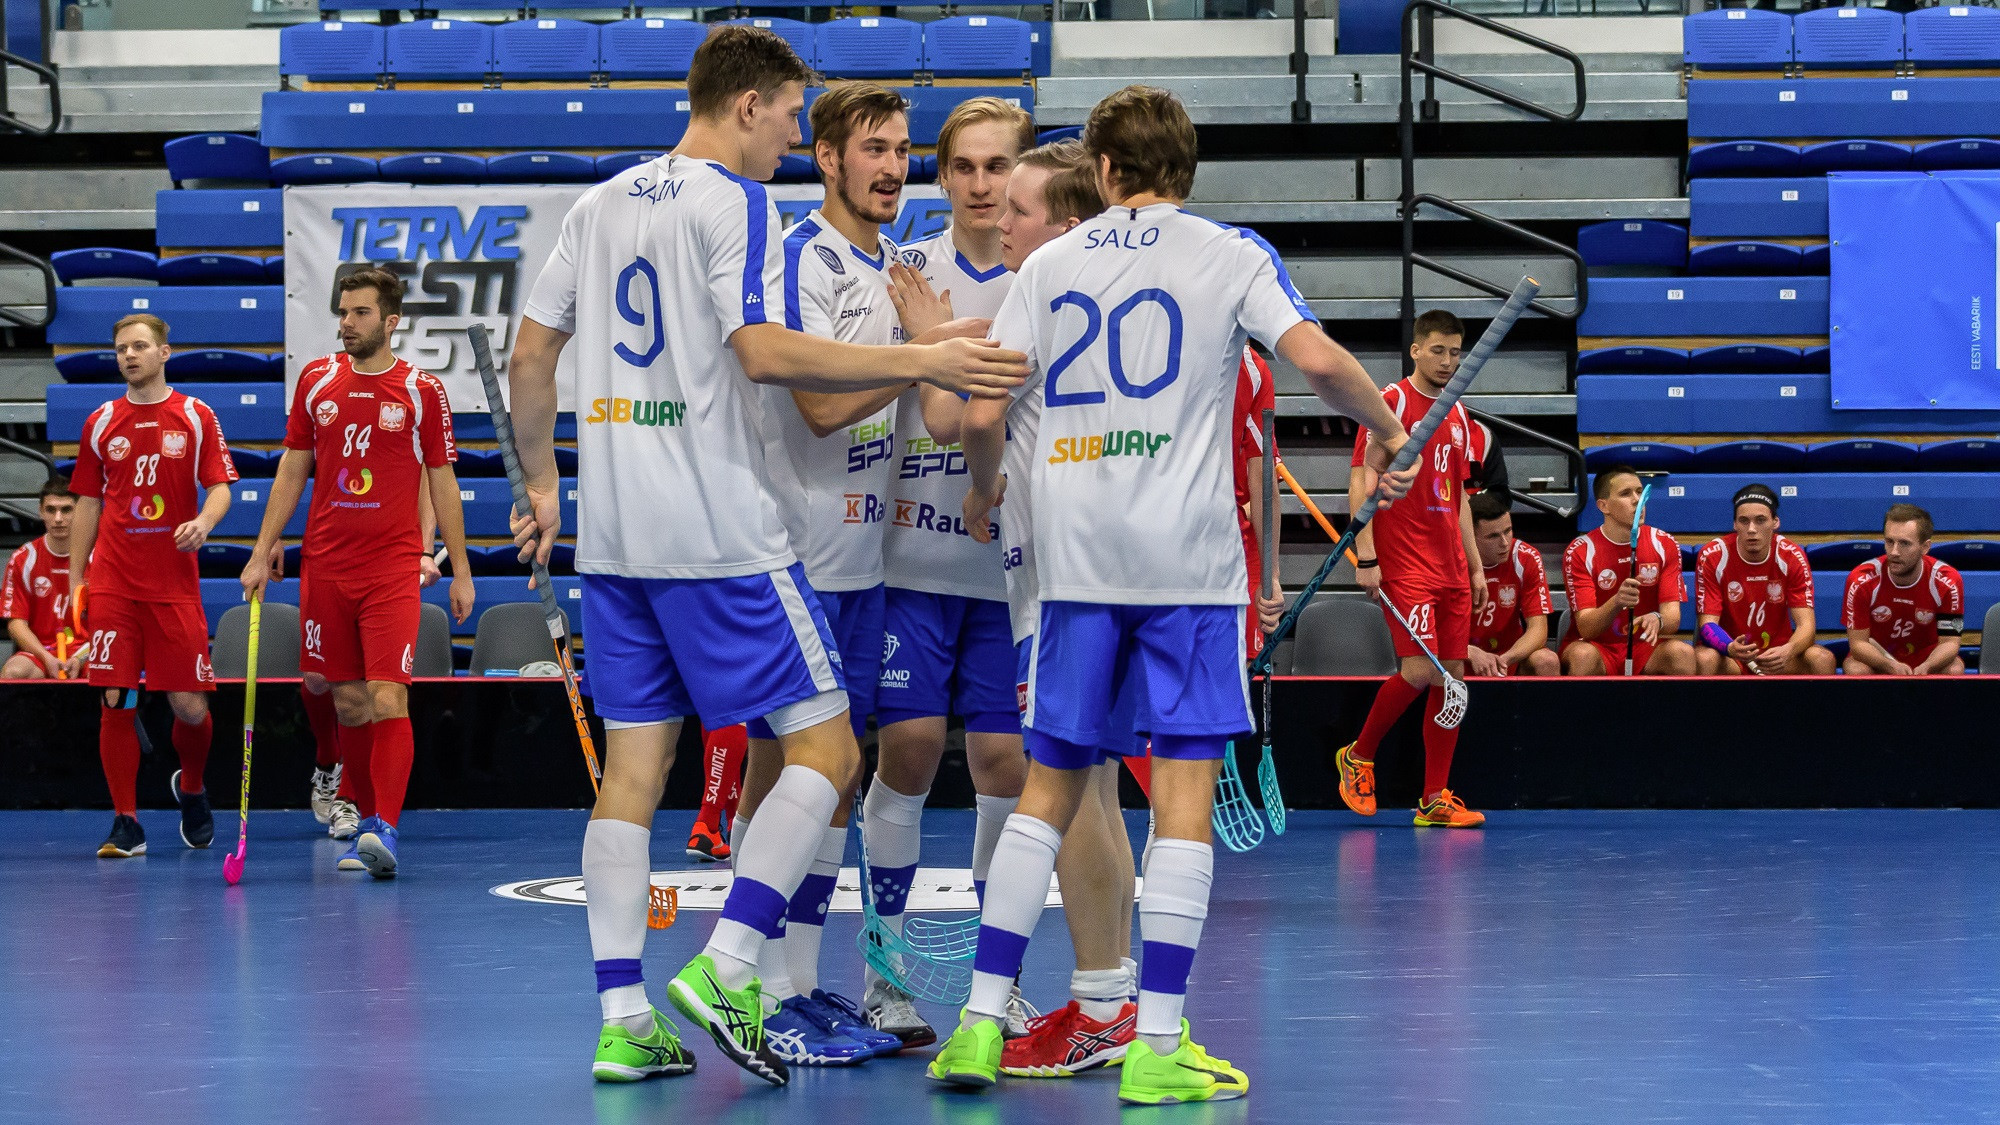 Finland eased to victory over Poland today as action got underway at the European qualification group one event for the 2018 Men’s World Floorball Championships ©IFF/Flickr